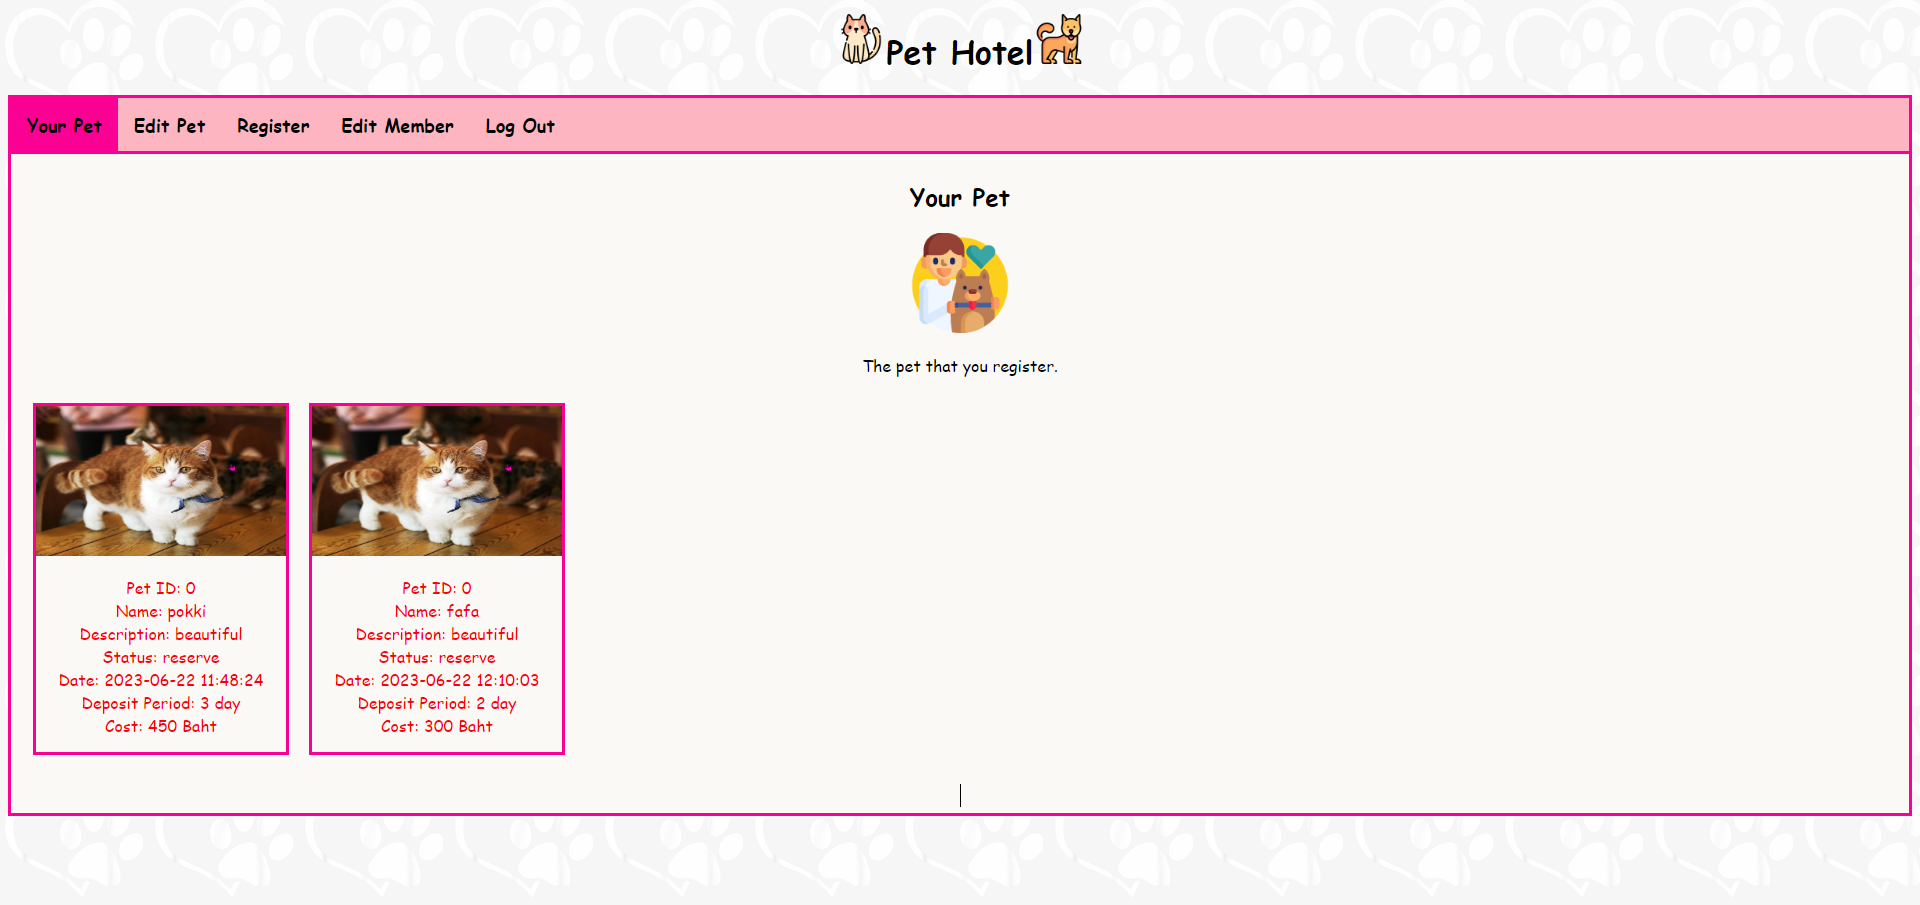 petHotel06_page_yourpet